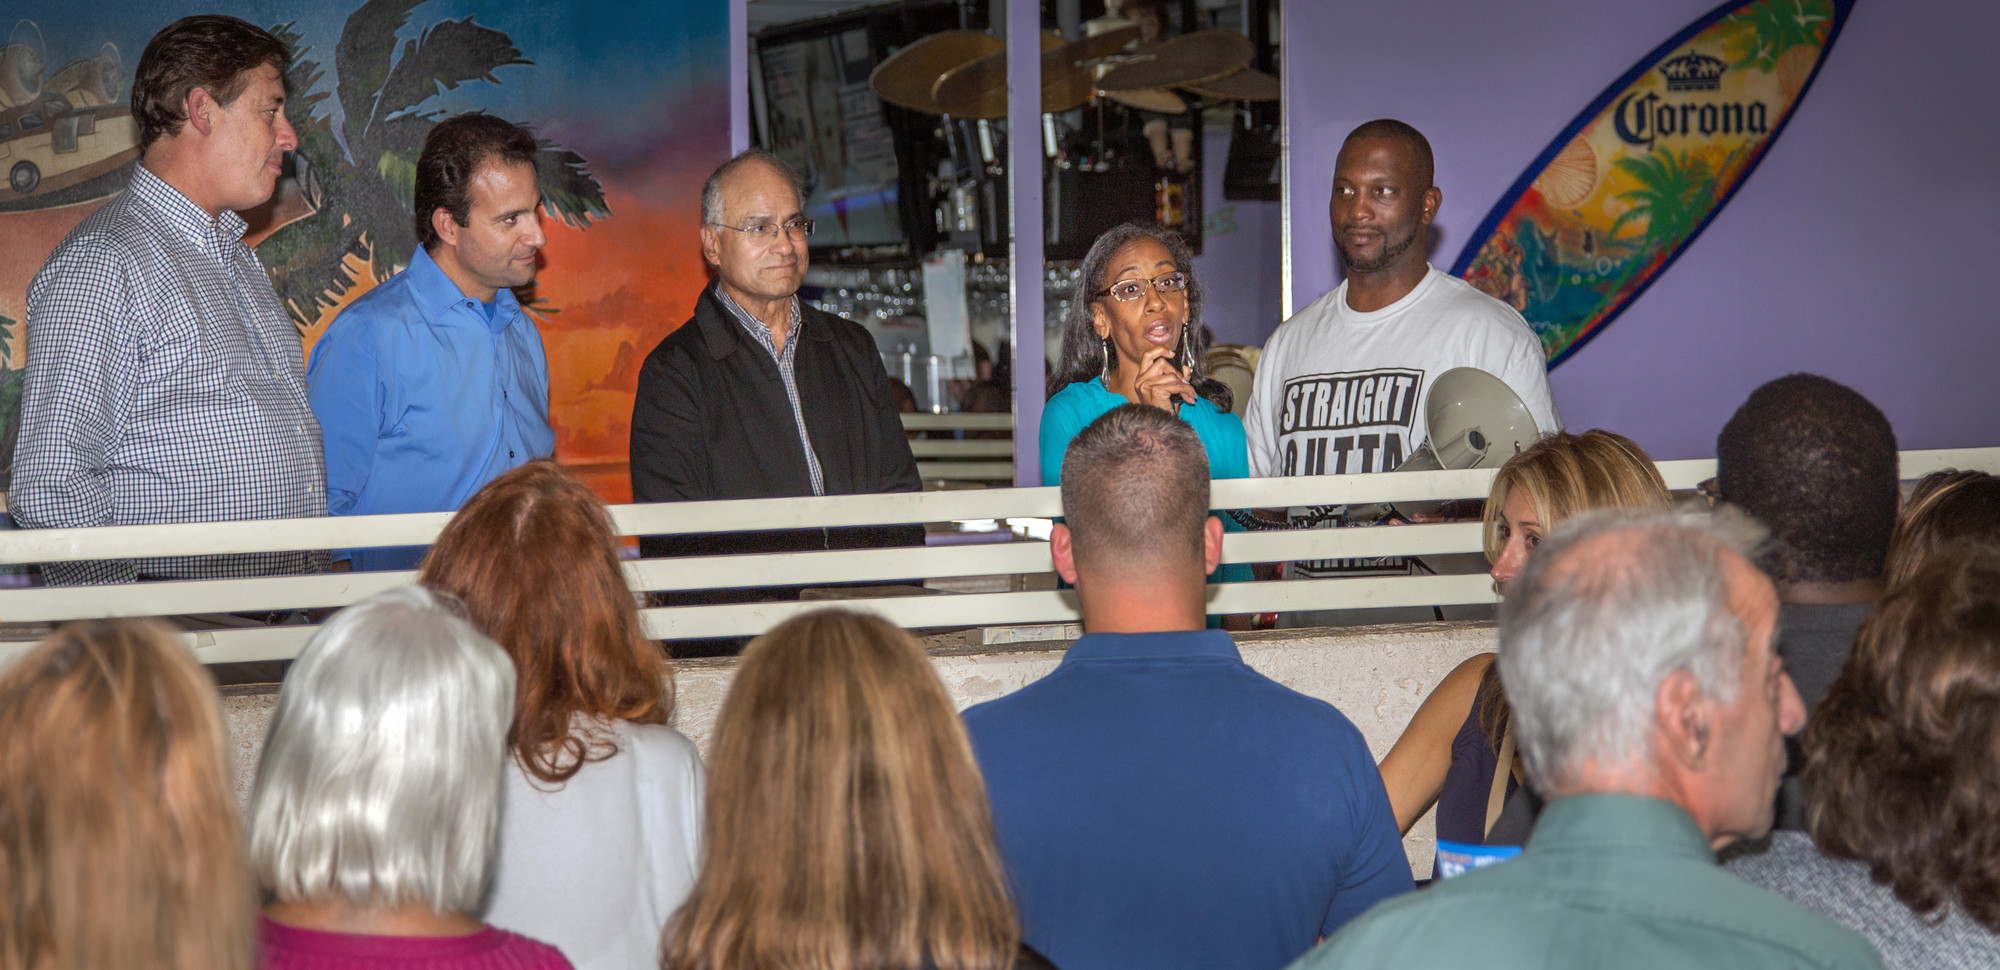 Anissa Moore addressed supporters at Billy’s Beach Café on Tuesday alongside her running mates Anthony Eramo and Len Torres, second and third from left.